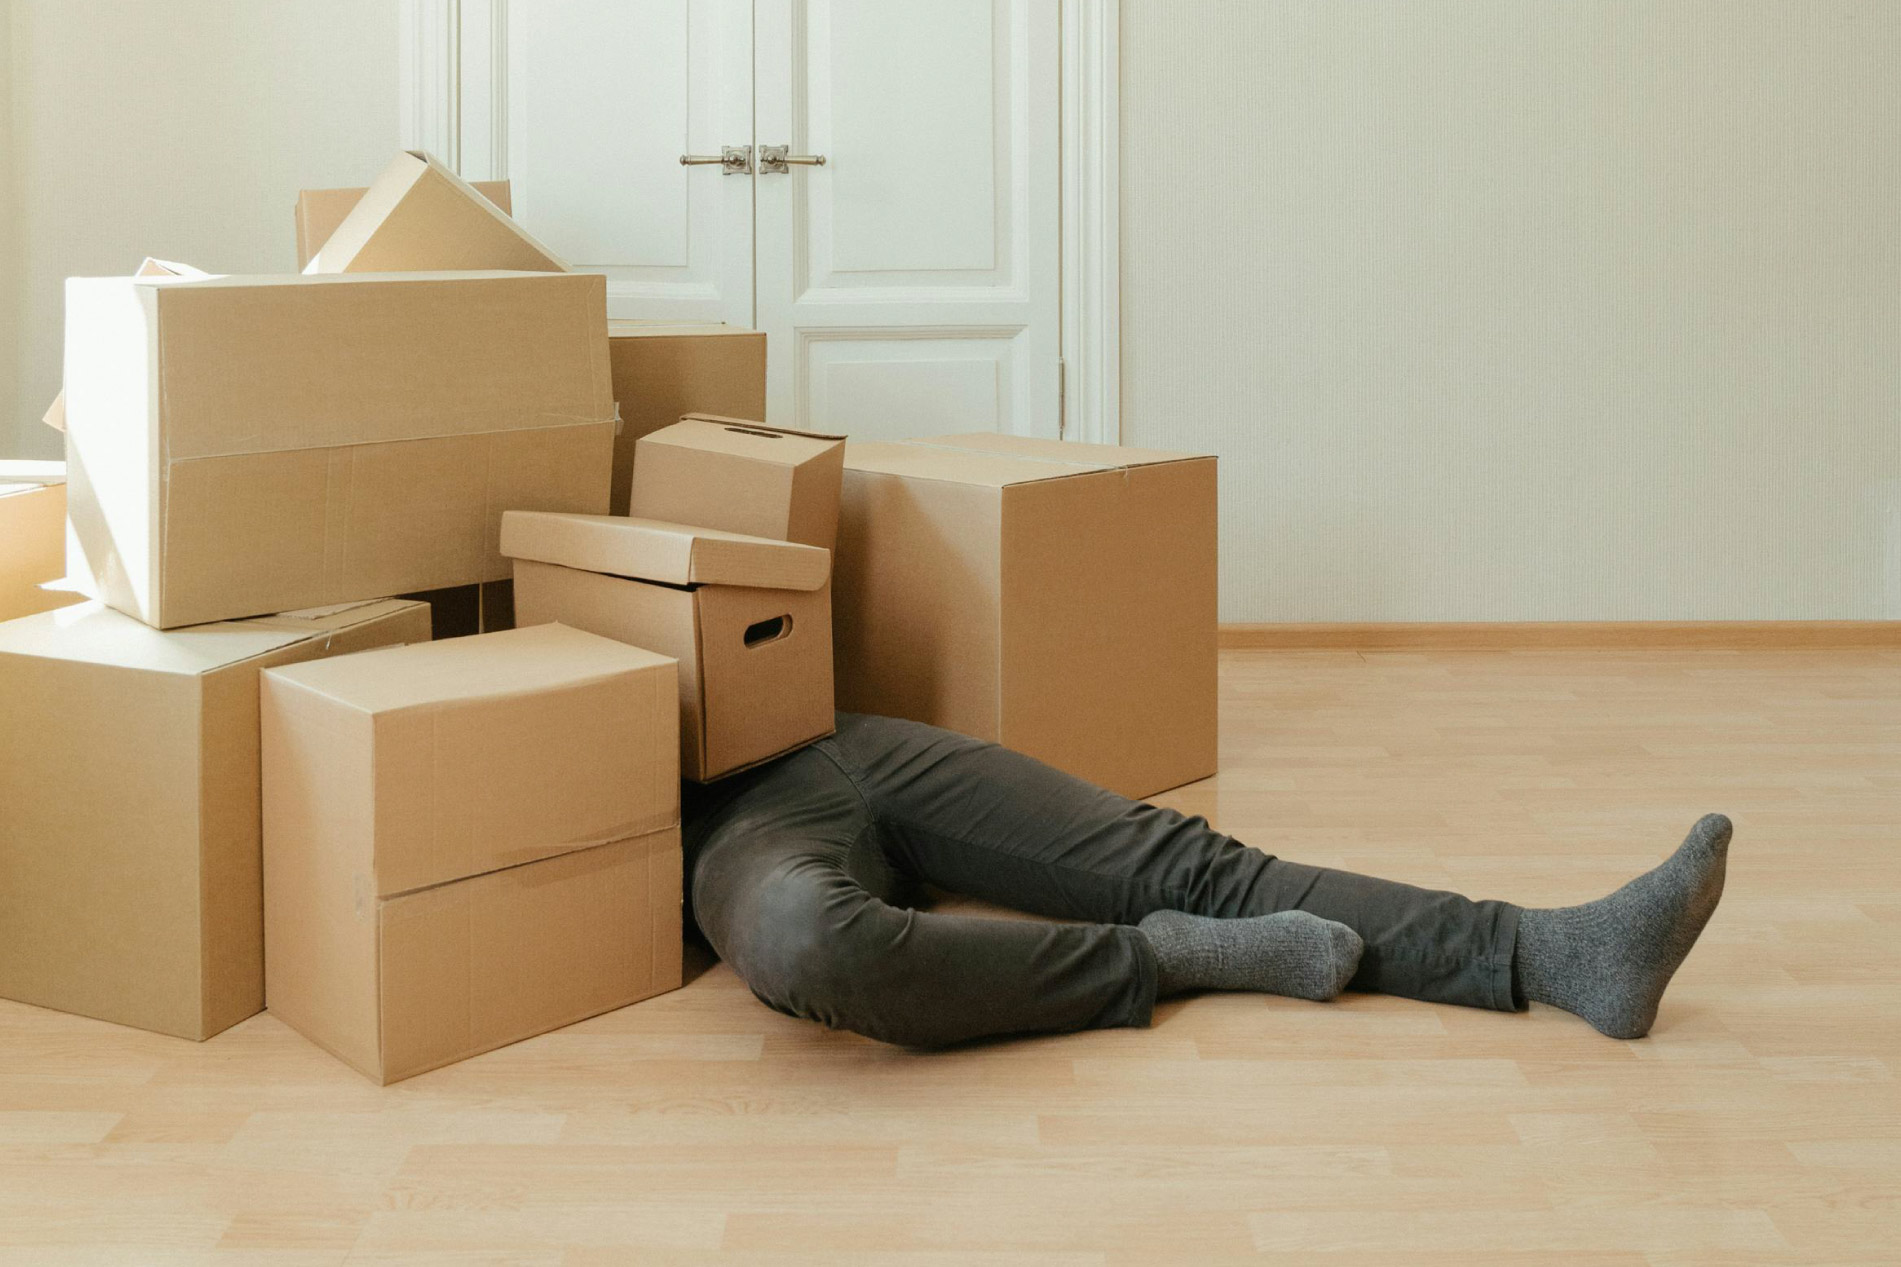 A person buried under a pile of moving boxes